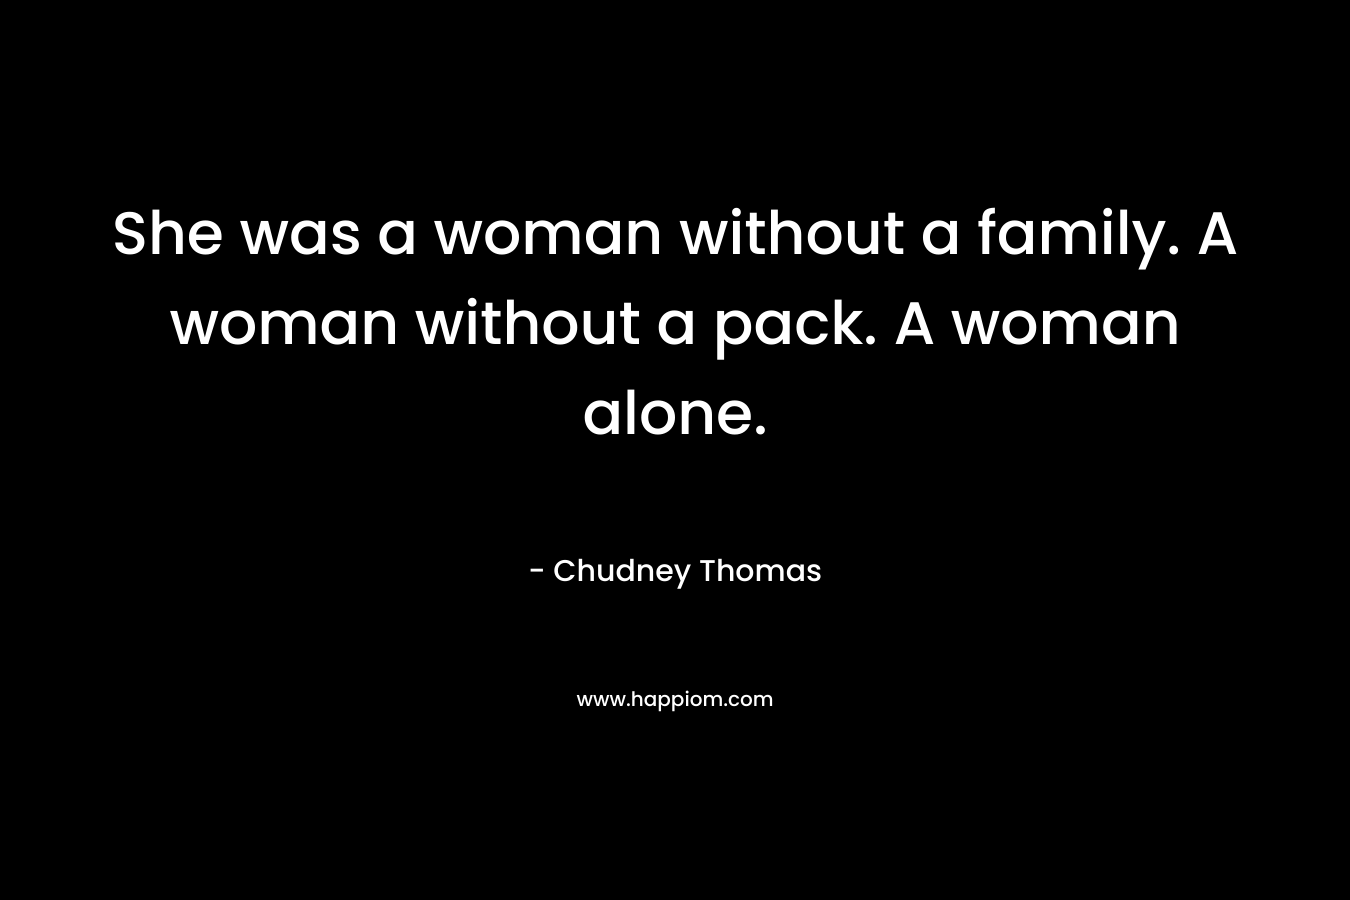 She was a woman without a family. A woman without a pack. A woman alone.